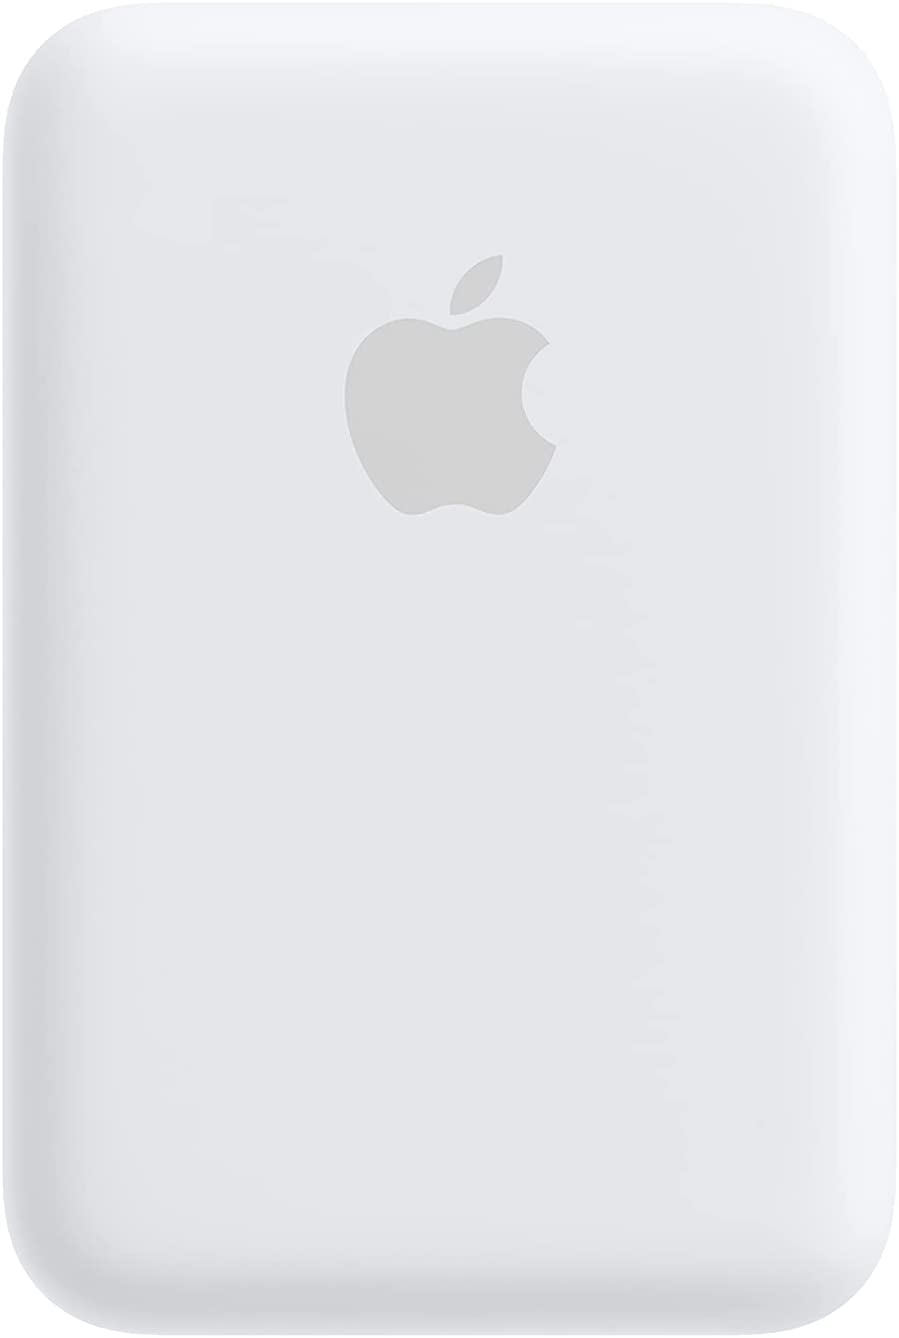 Apple MagSafe Battery Pack - White (Refurbished)